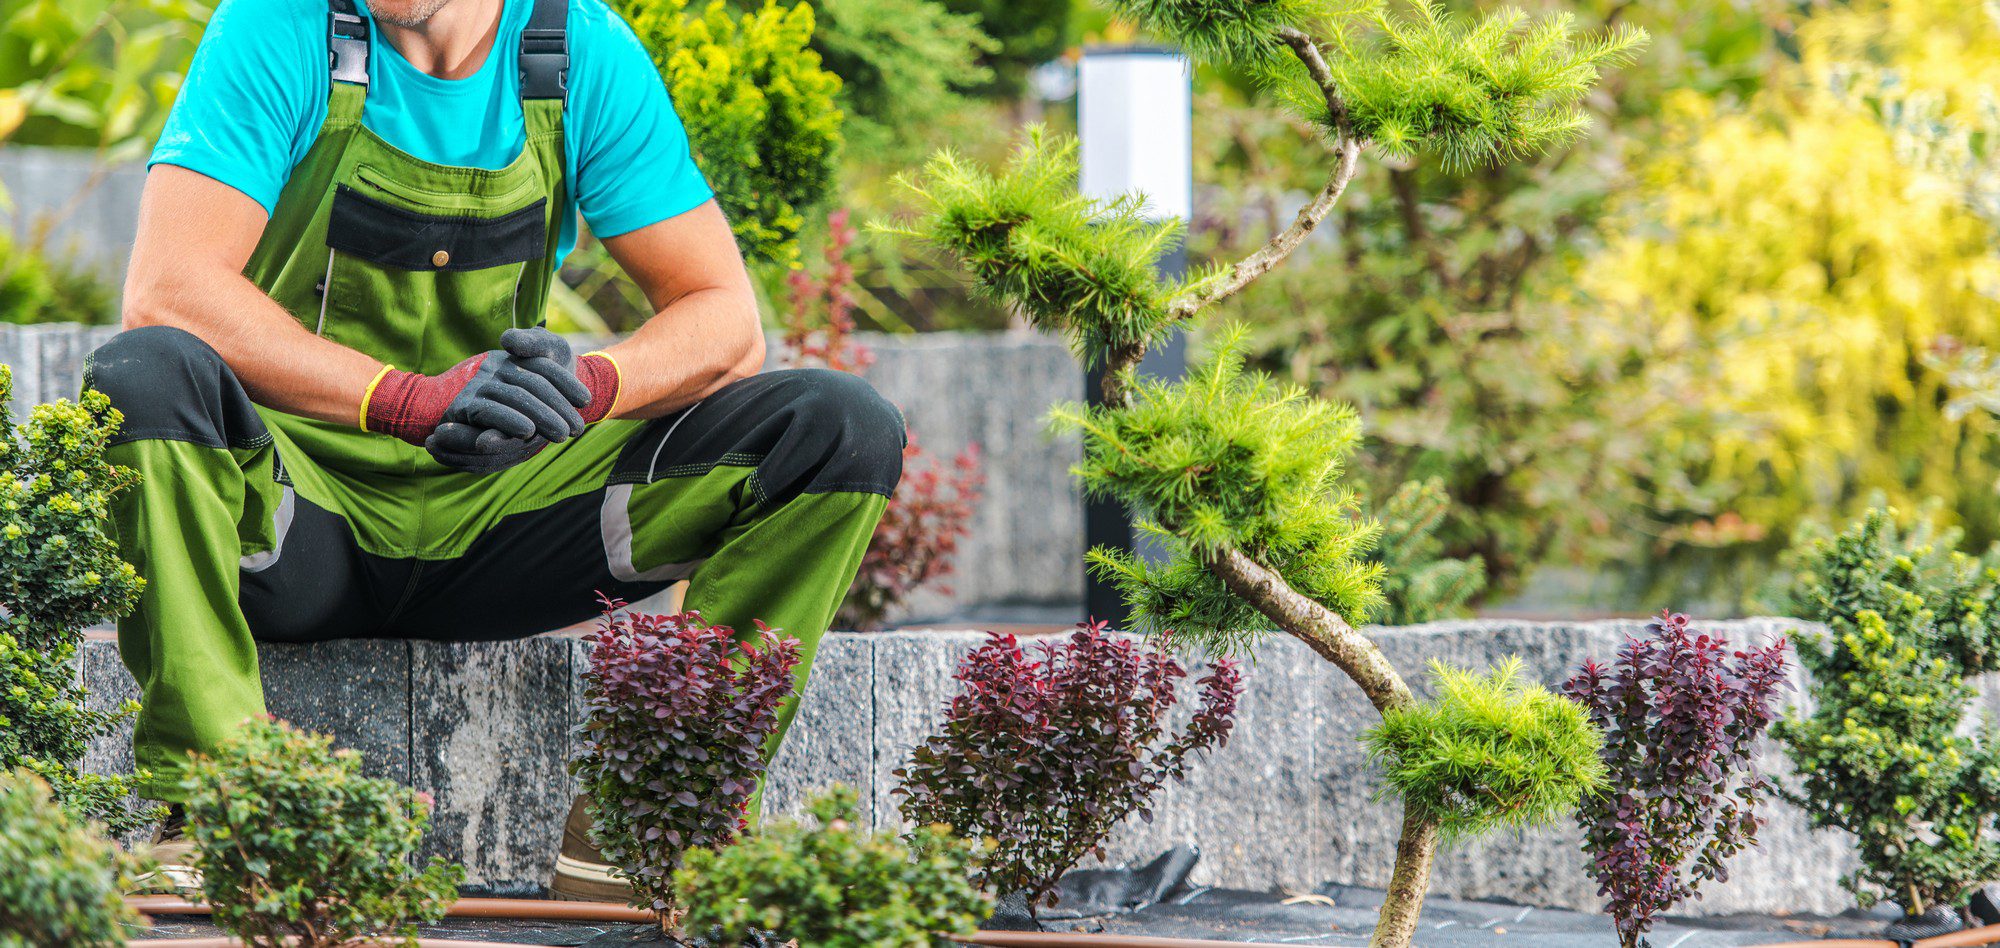 The image shows a person squatting down in a garden or nursery. They appear to be a gardener or horticulturist, wearing a blue t-shirt with green overalls and gloves, potentially practicing or working on maintaining small trees or shrubs which could be bonsai or simply young plants. There are several plants with green and reddish foliage around this person, and the setting looks like a controlled outdoor environment, possibly a section of a nursery dedicated to small trees or decorative plants. The background is blurred but suggests a lush, green garden setting.